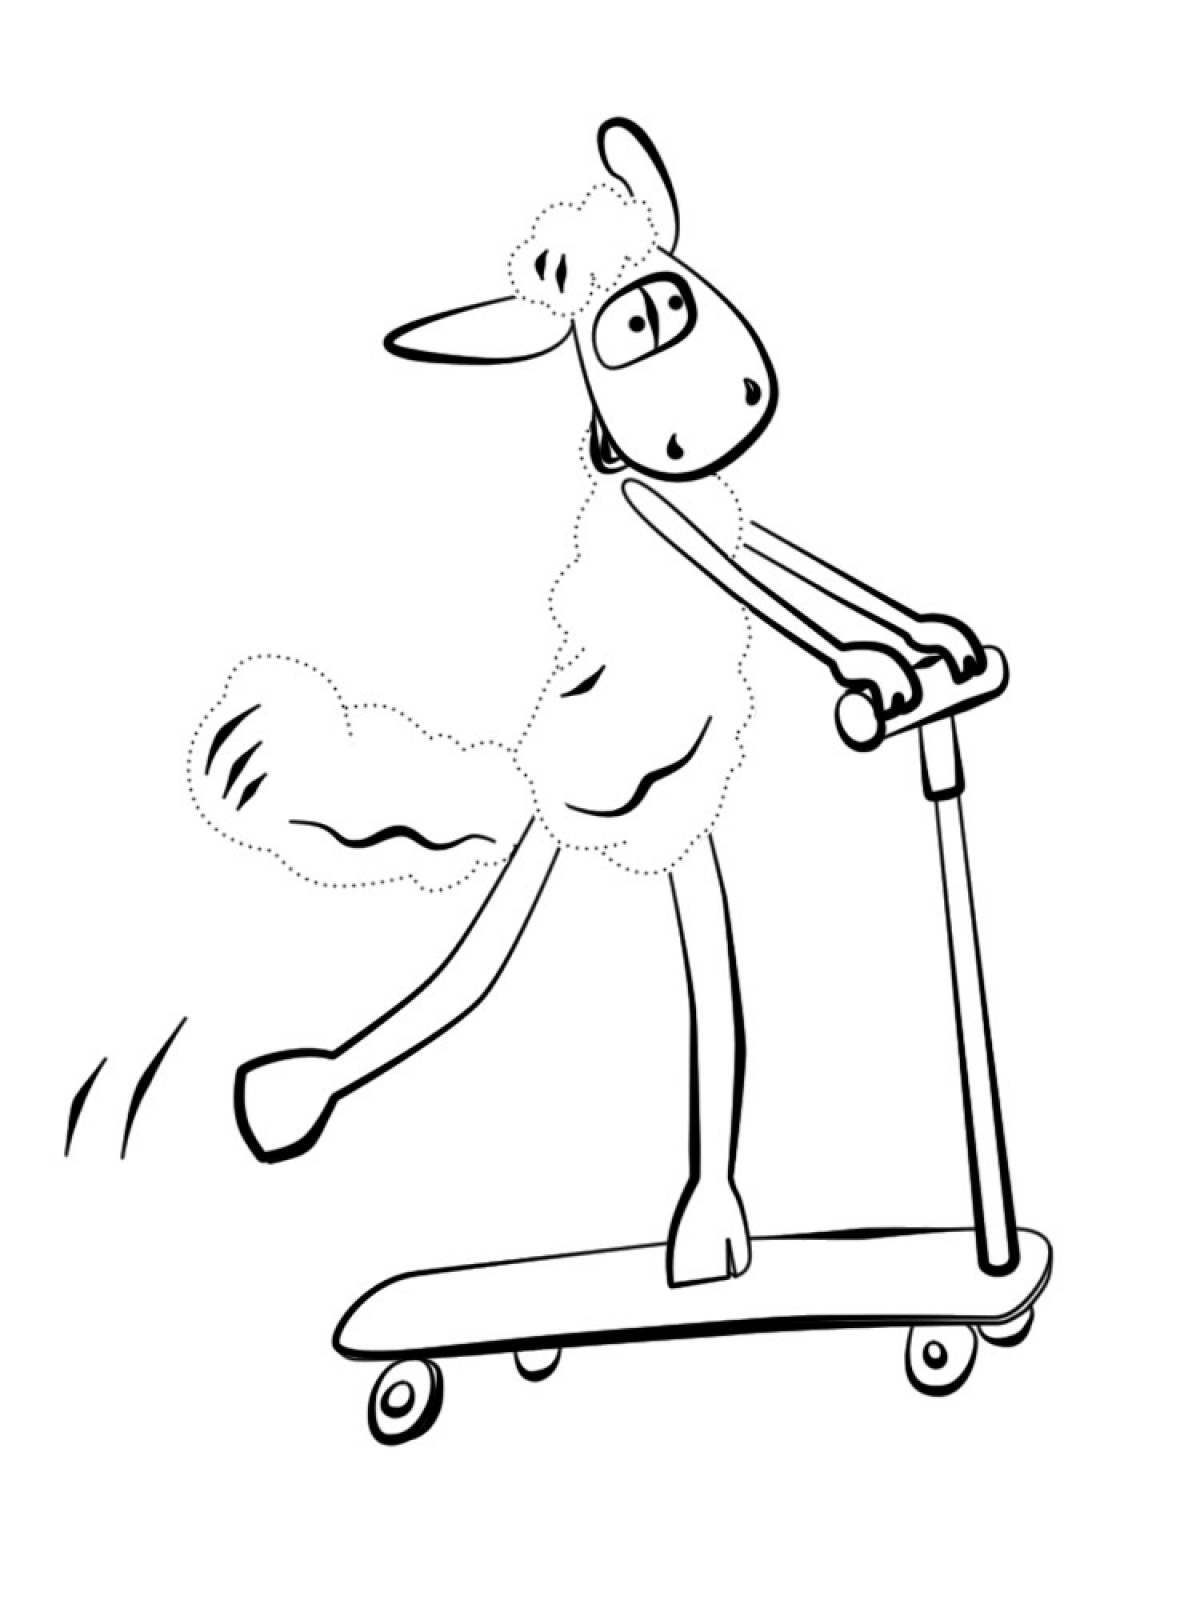 Sheep on a scooter